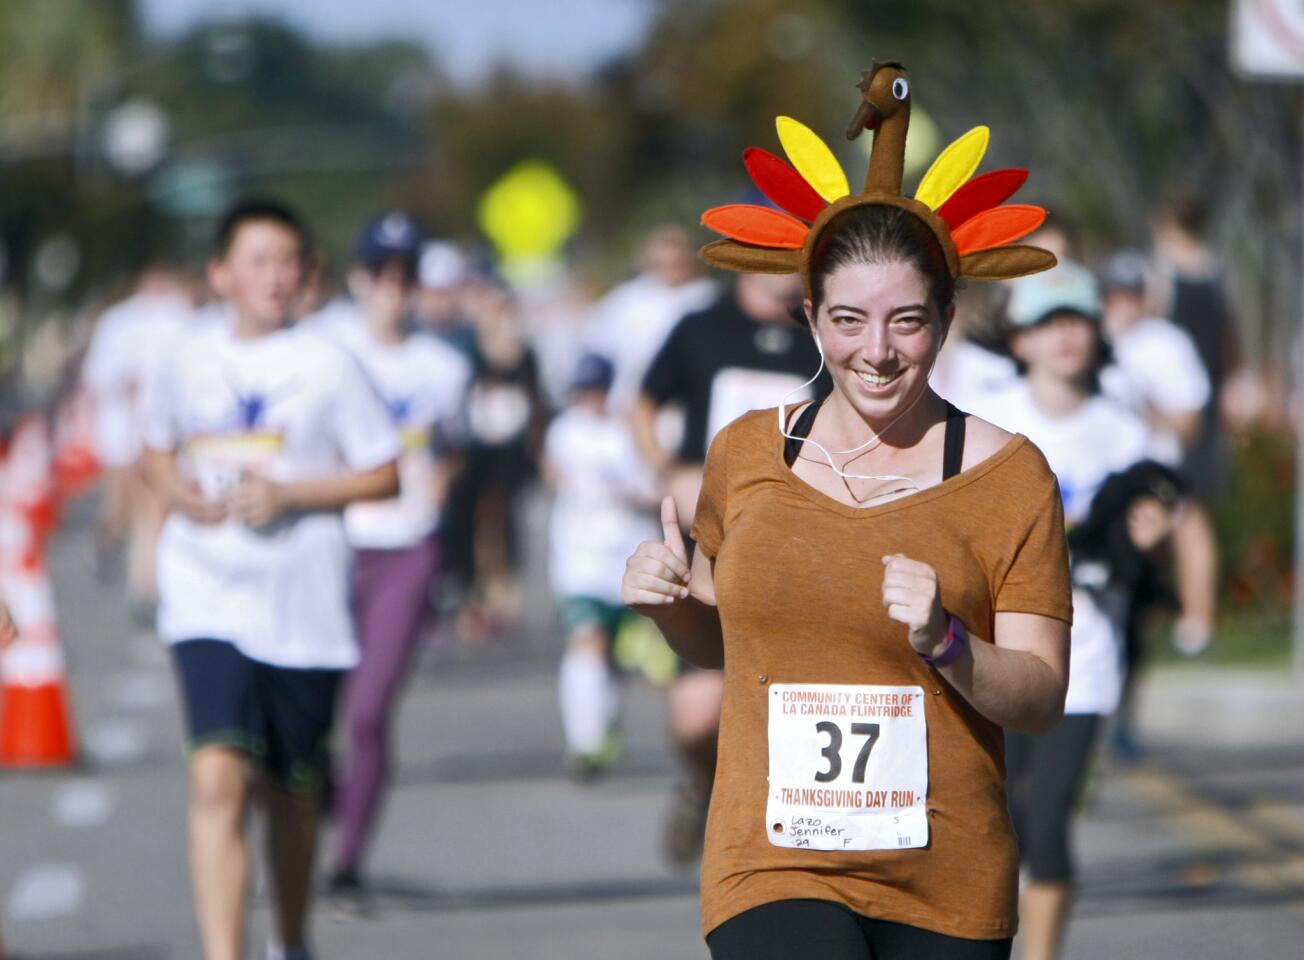 Jennifer Lazo, 29, participated in the annual Community Center of La Cañada Flintridge Thanksgiving Day Run, on Foothill Boulevard, in La Cañada Flintridge, on Thursday, Nov. 24, 2016. About 1,700 runners of all ages were expected to run.